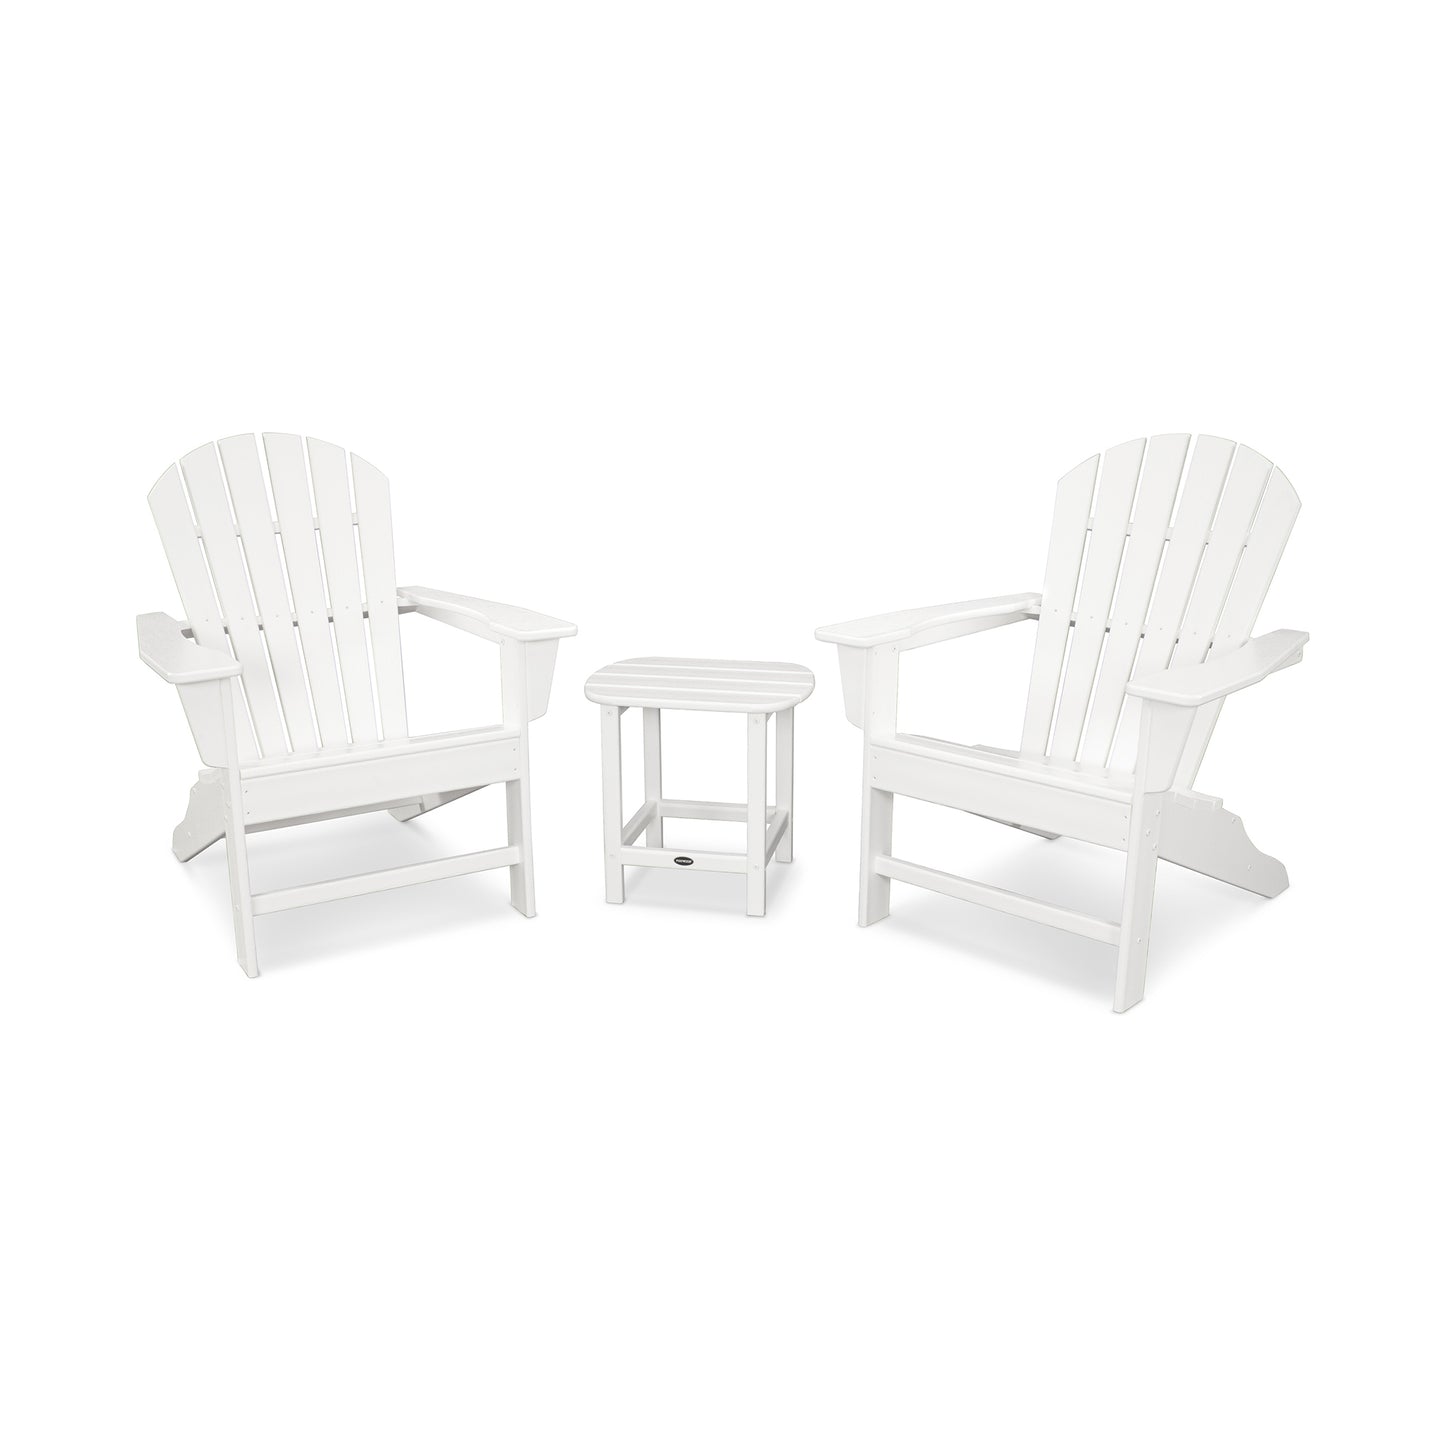 Two white POLYWOOD South Beach Adirondack chairs with a small matching table between them, set against a white background.